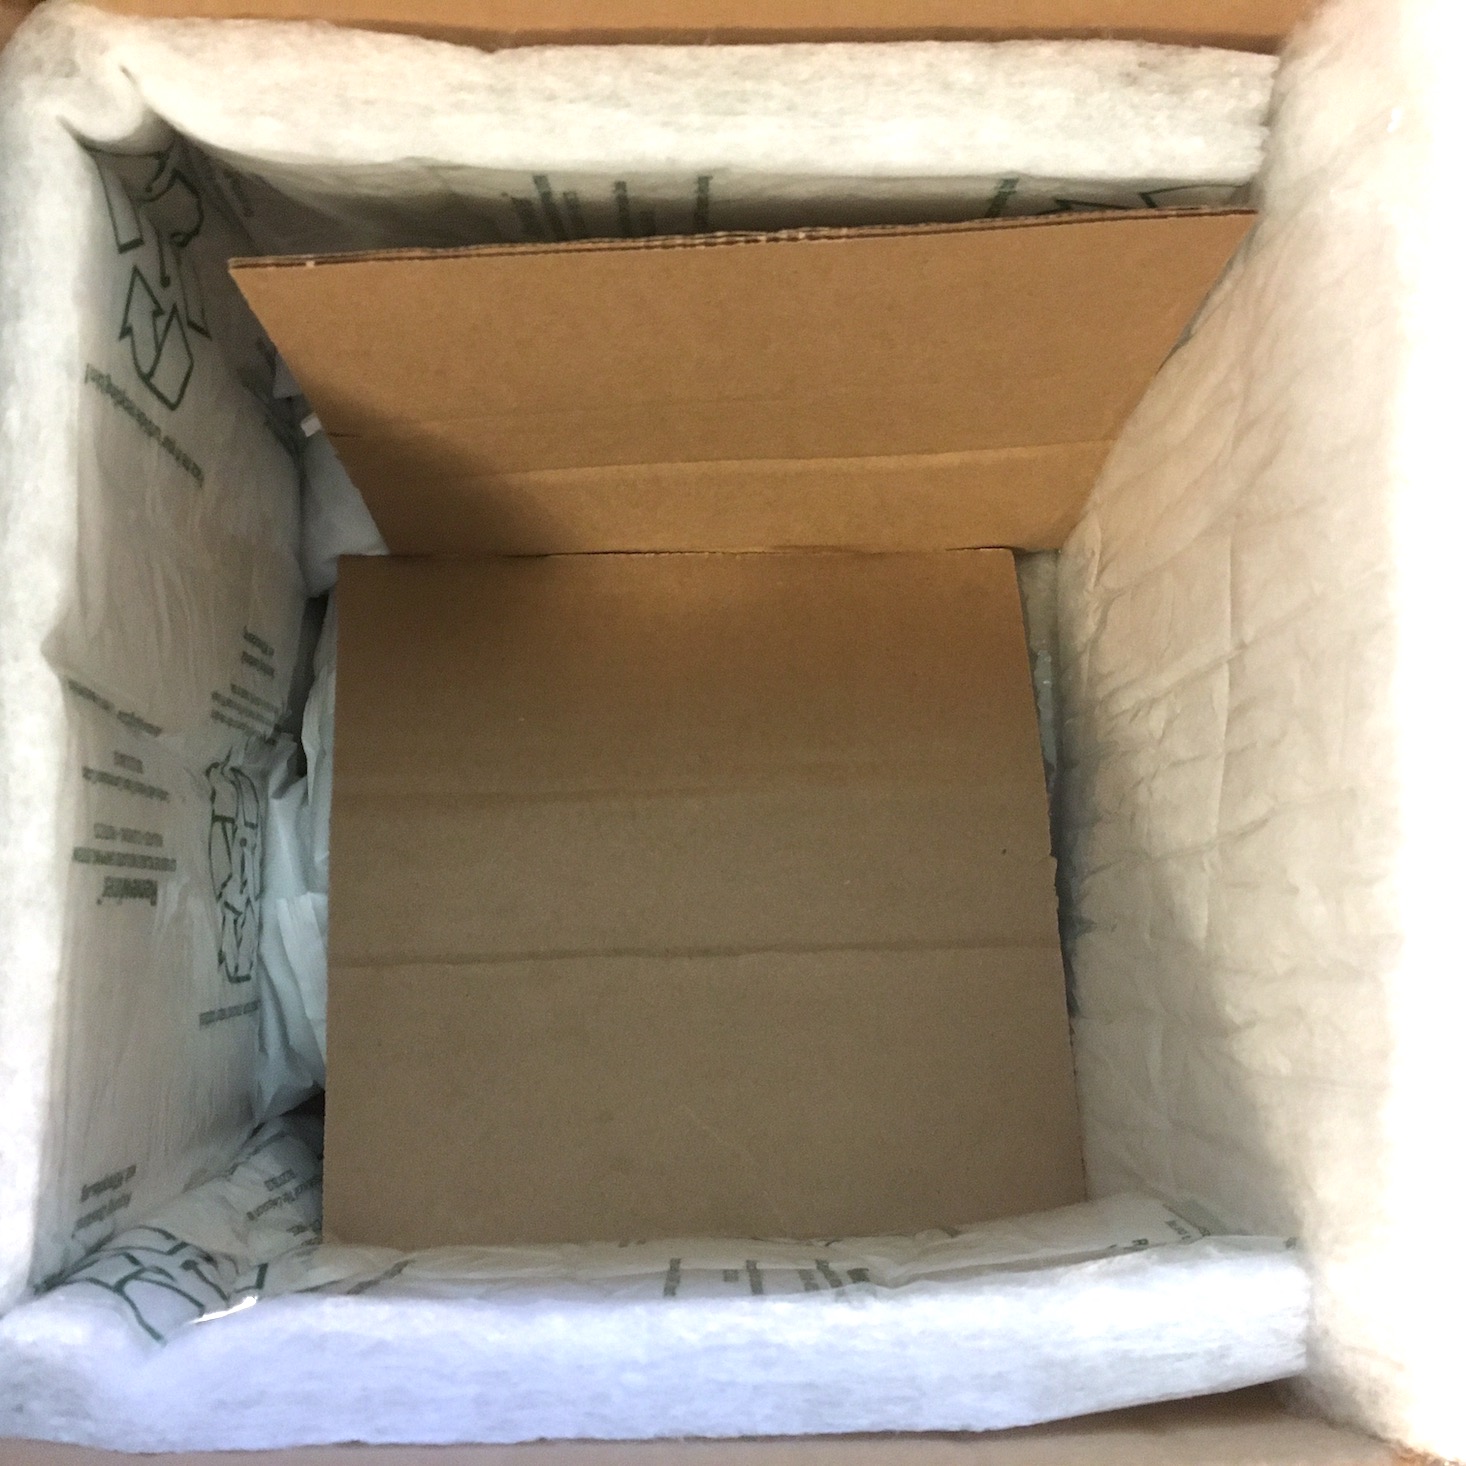 opened box showing. cardboard dividers